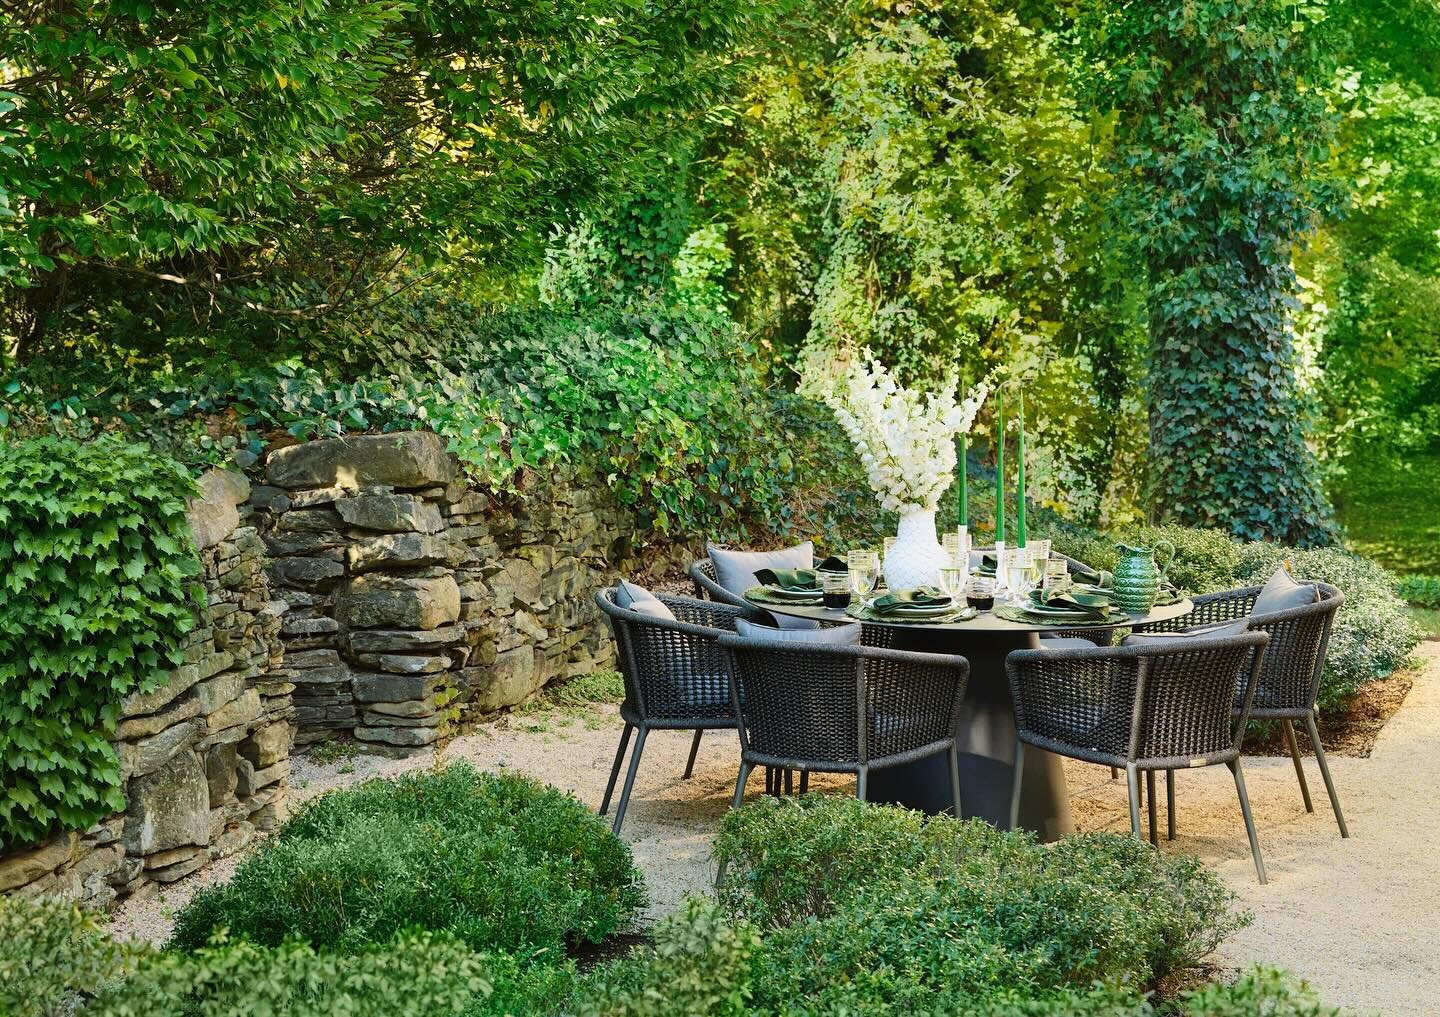 Can&rsquo;t wait to resume garden parties and dining al fresco! Loved creating this dreamy setting for Janus et Cie&rsquo;s latest campaign. Spring is just around the corner&hellip;

Cone II dining table, Knot armchairs, Monsoon Ixora vase and Monsoo